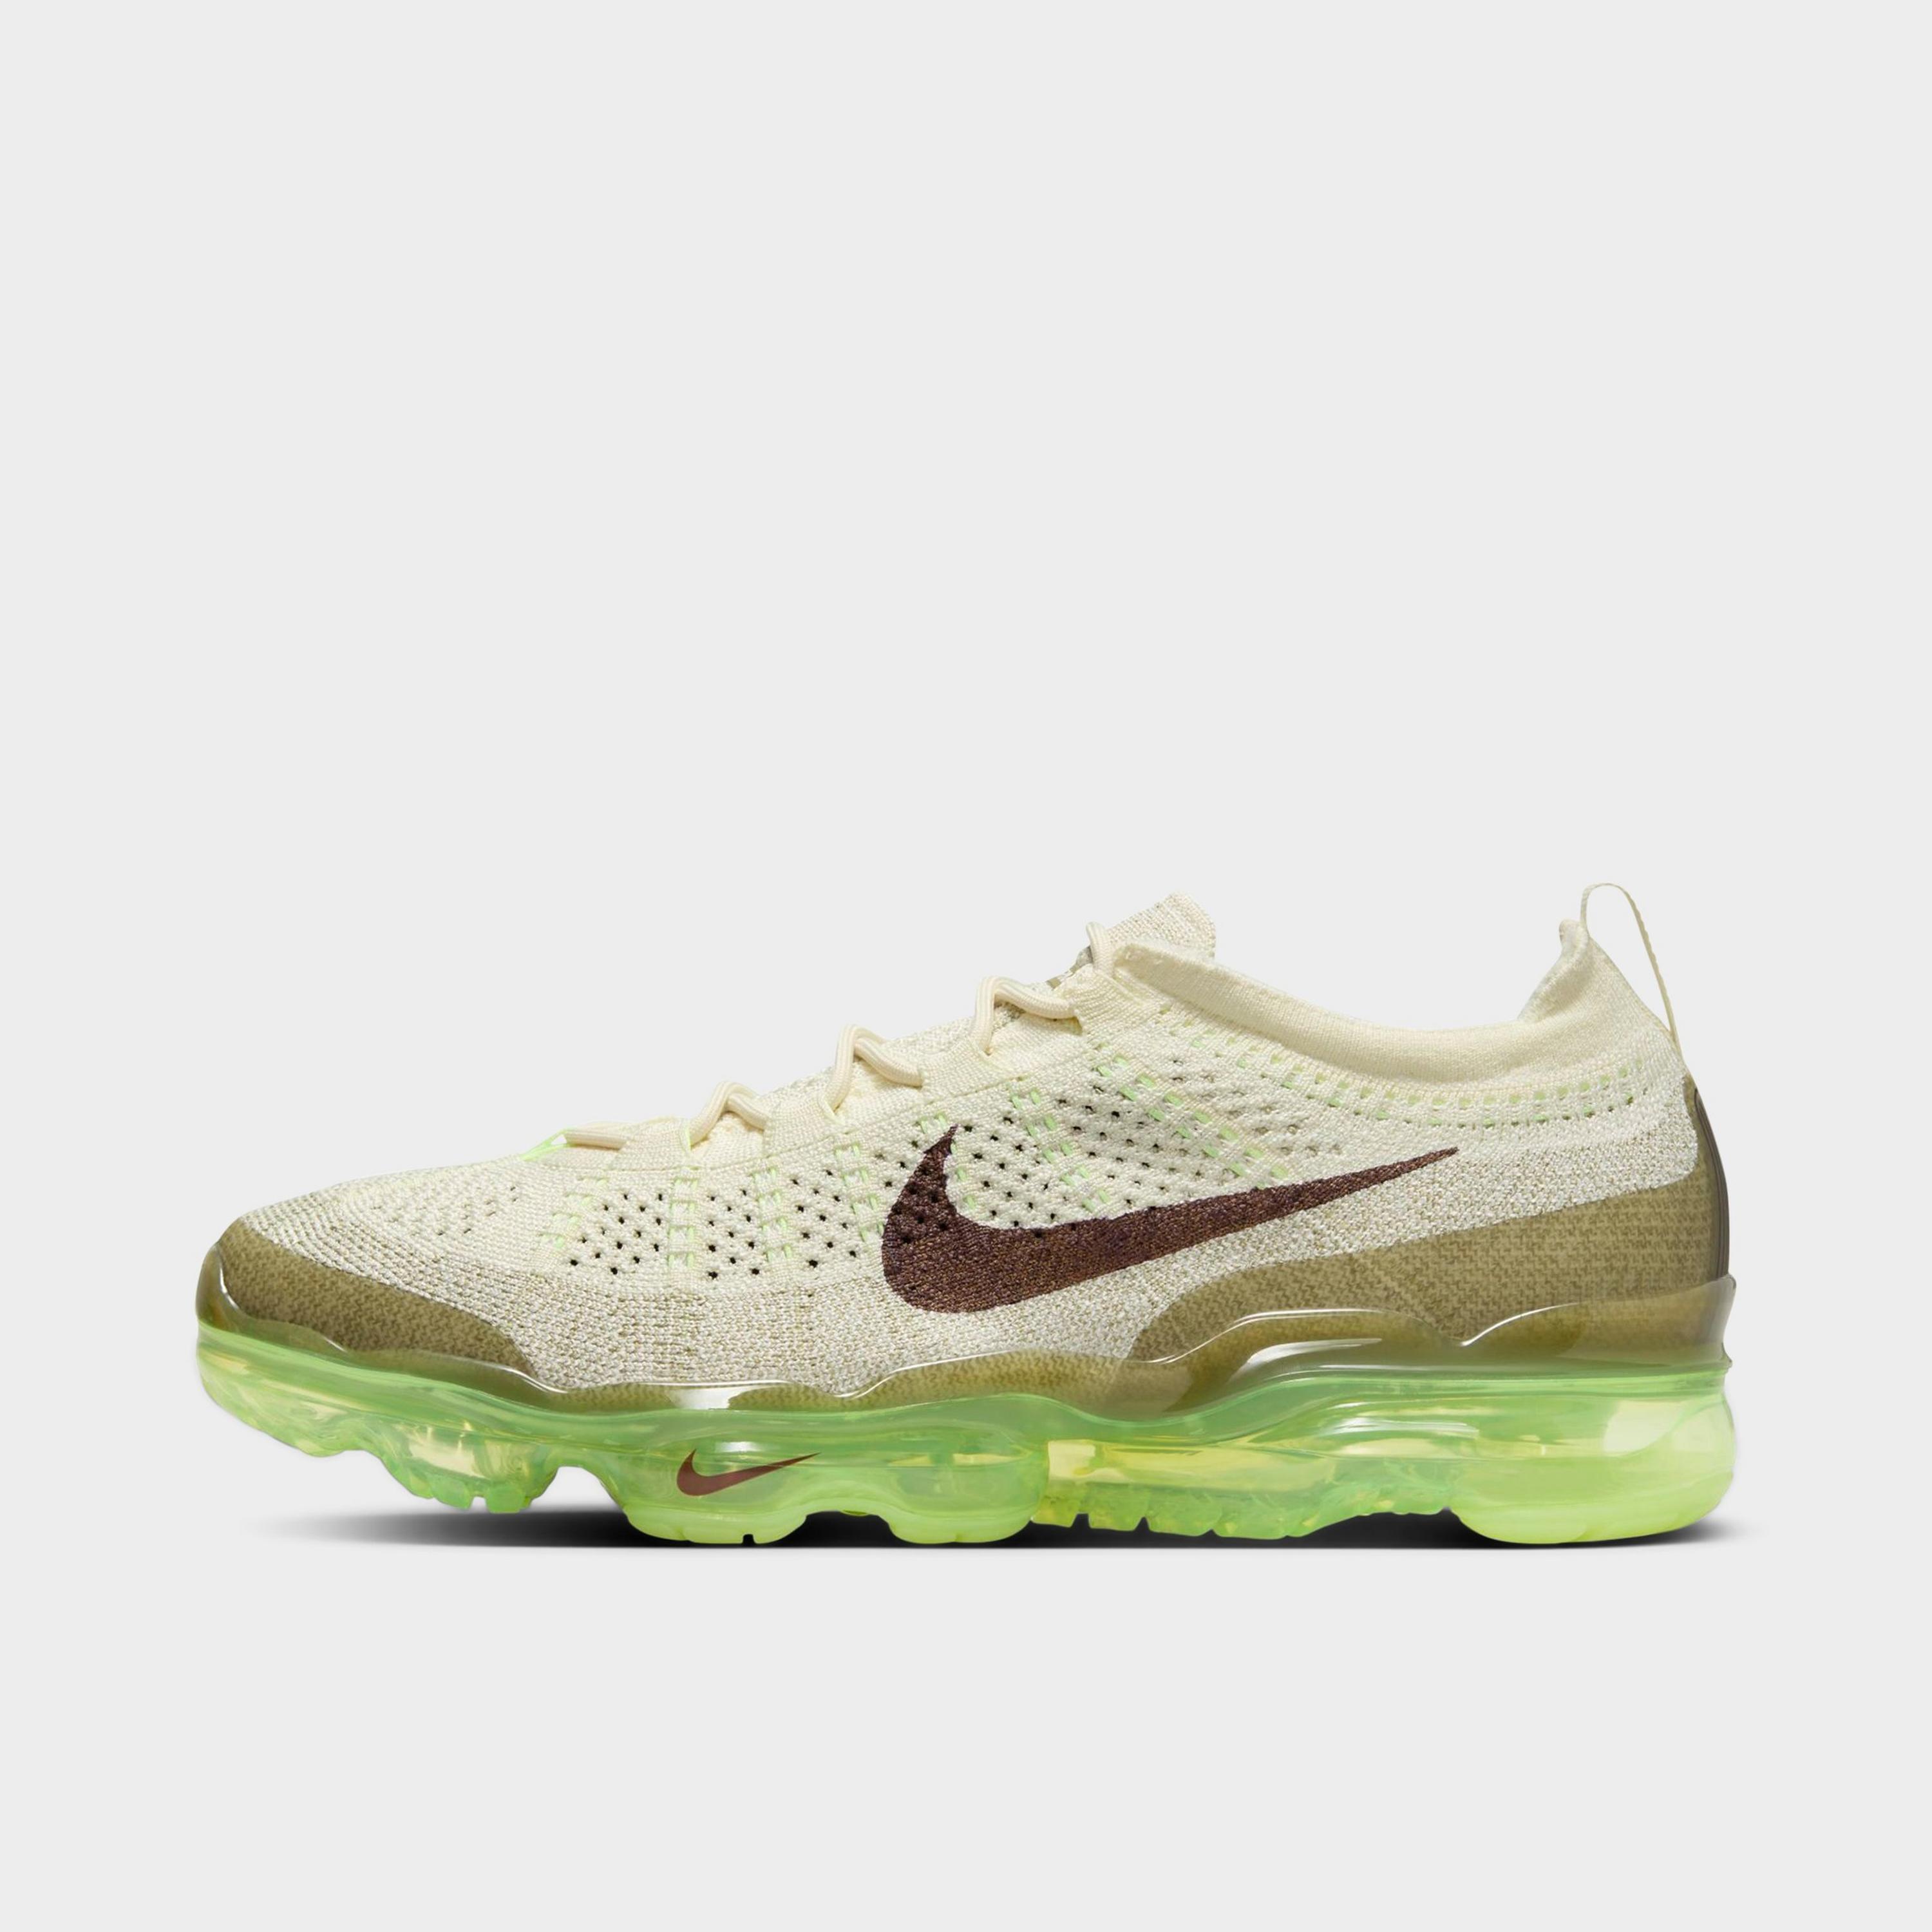 Nike Men's Air VaporMax 2023 Flyknit Shoes (Coconut Milk/Neutral Olive) $136.95 + Free Shipping